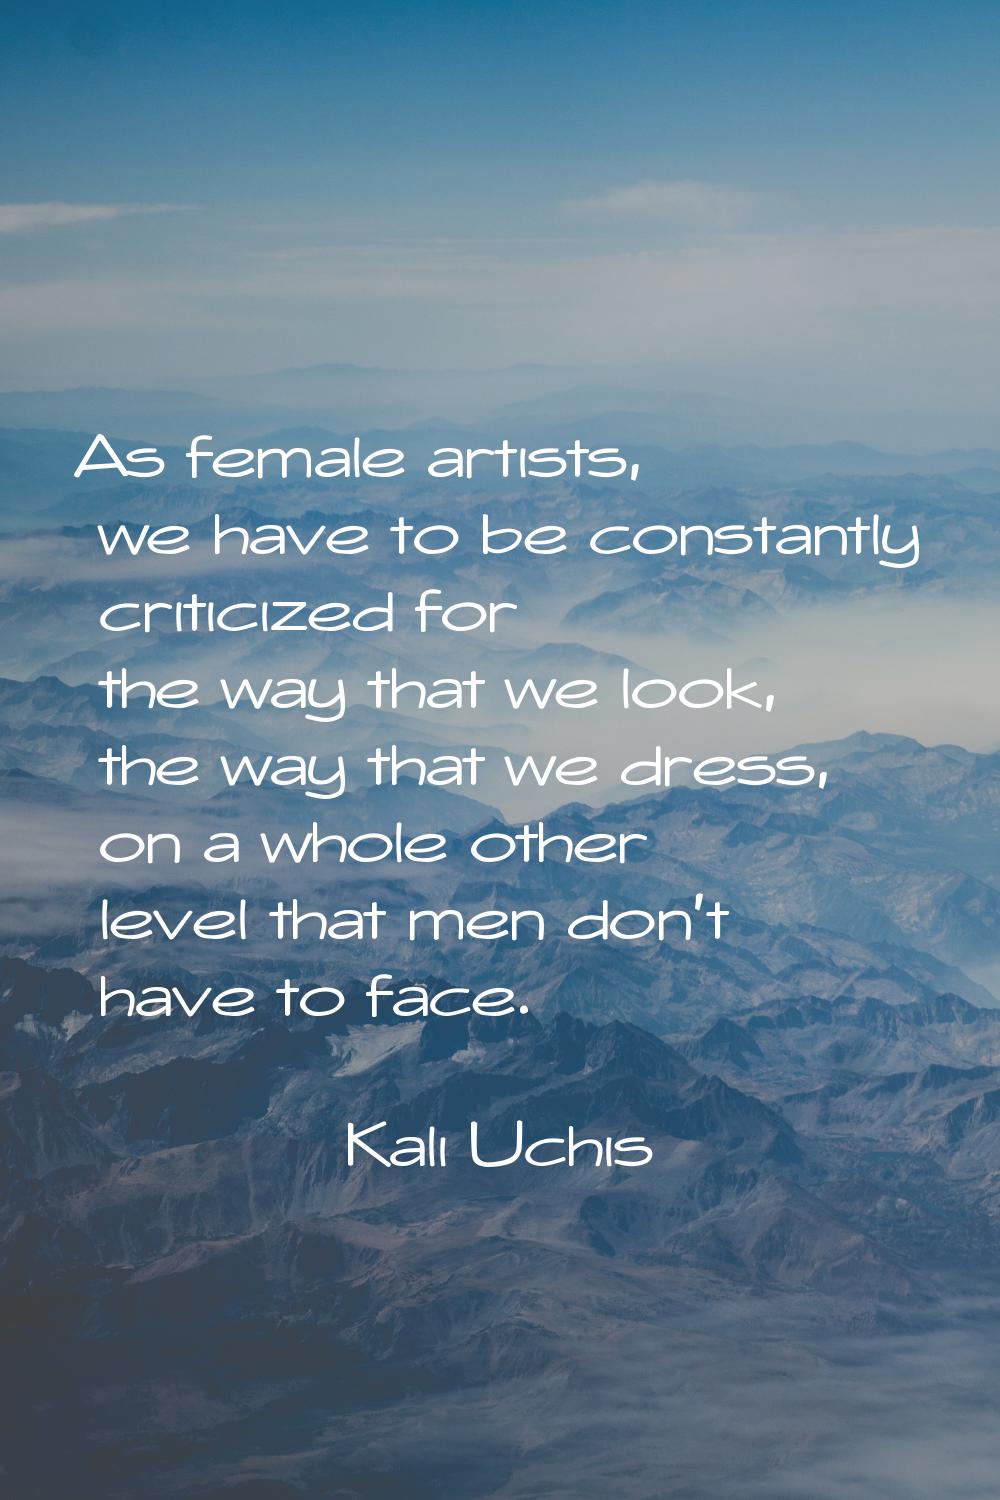 As female artists, we have to be constantly criticized for the way that we look, the way that we dr